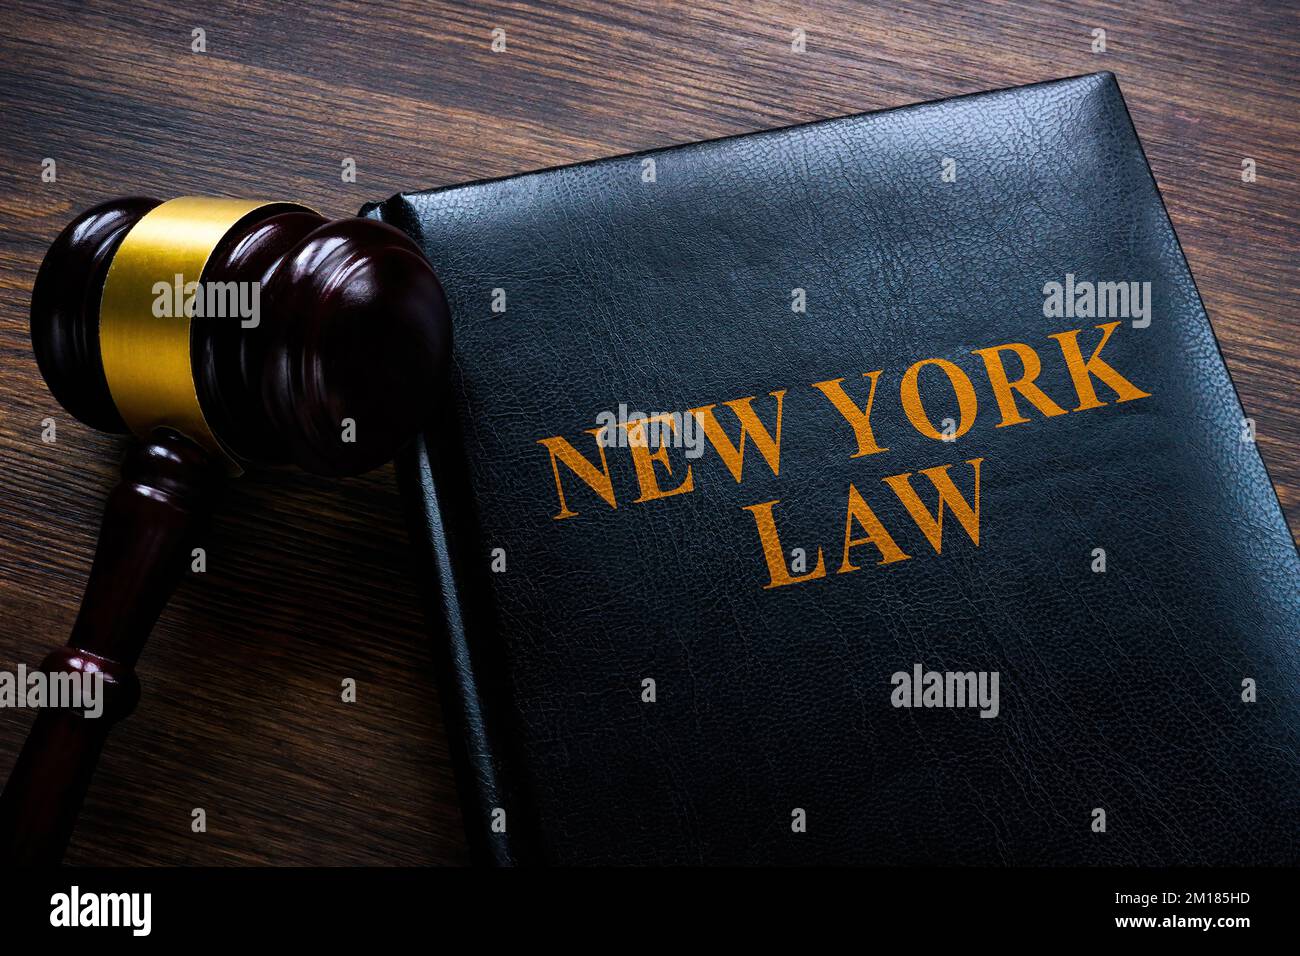 New York law book with gavel on the wooden surface. Stock Photo